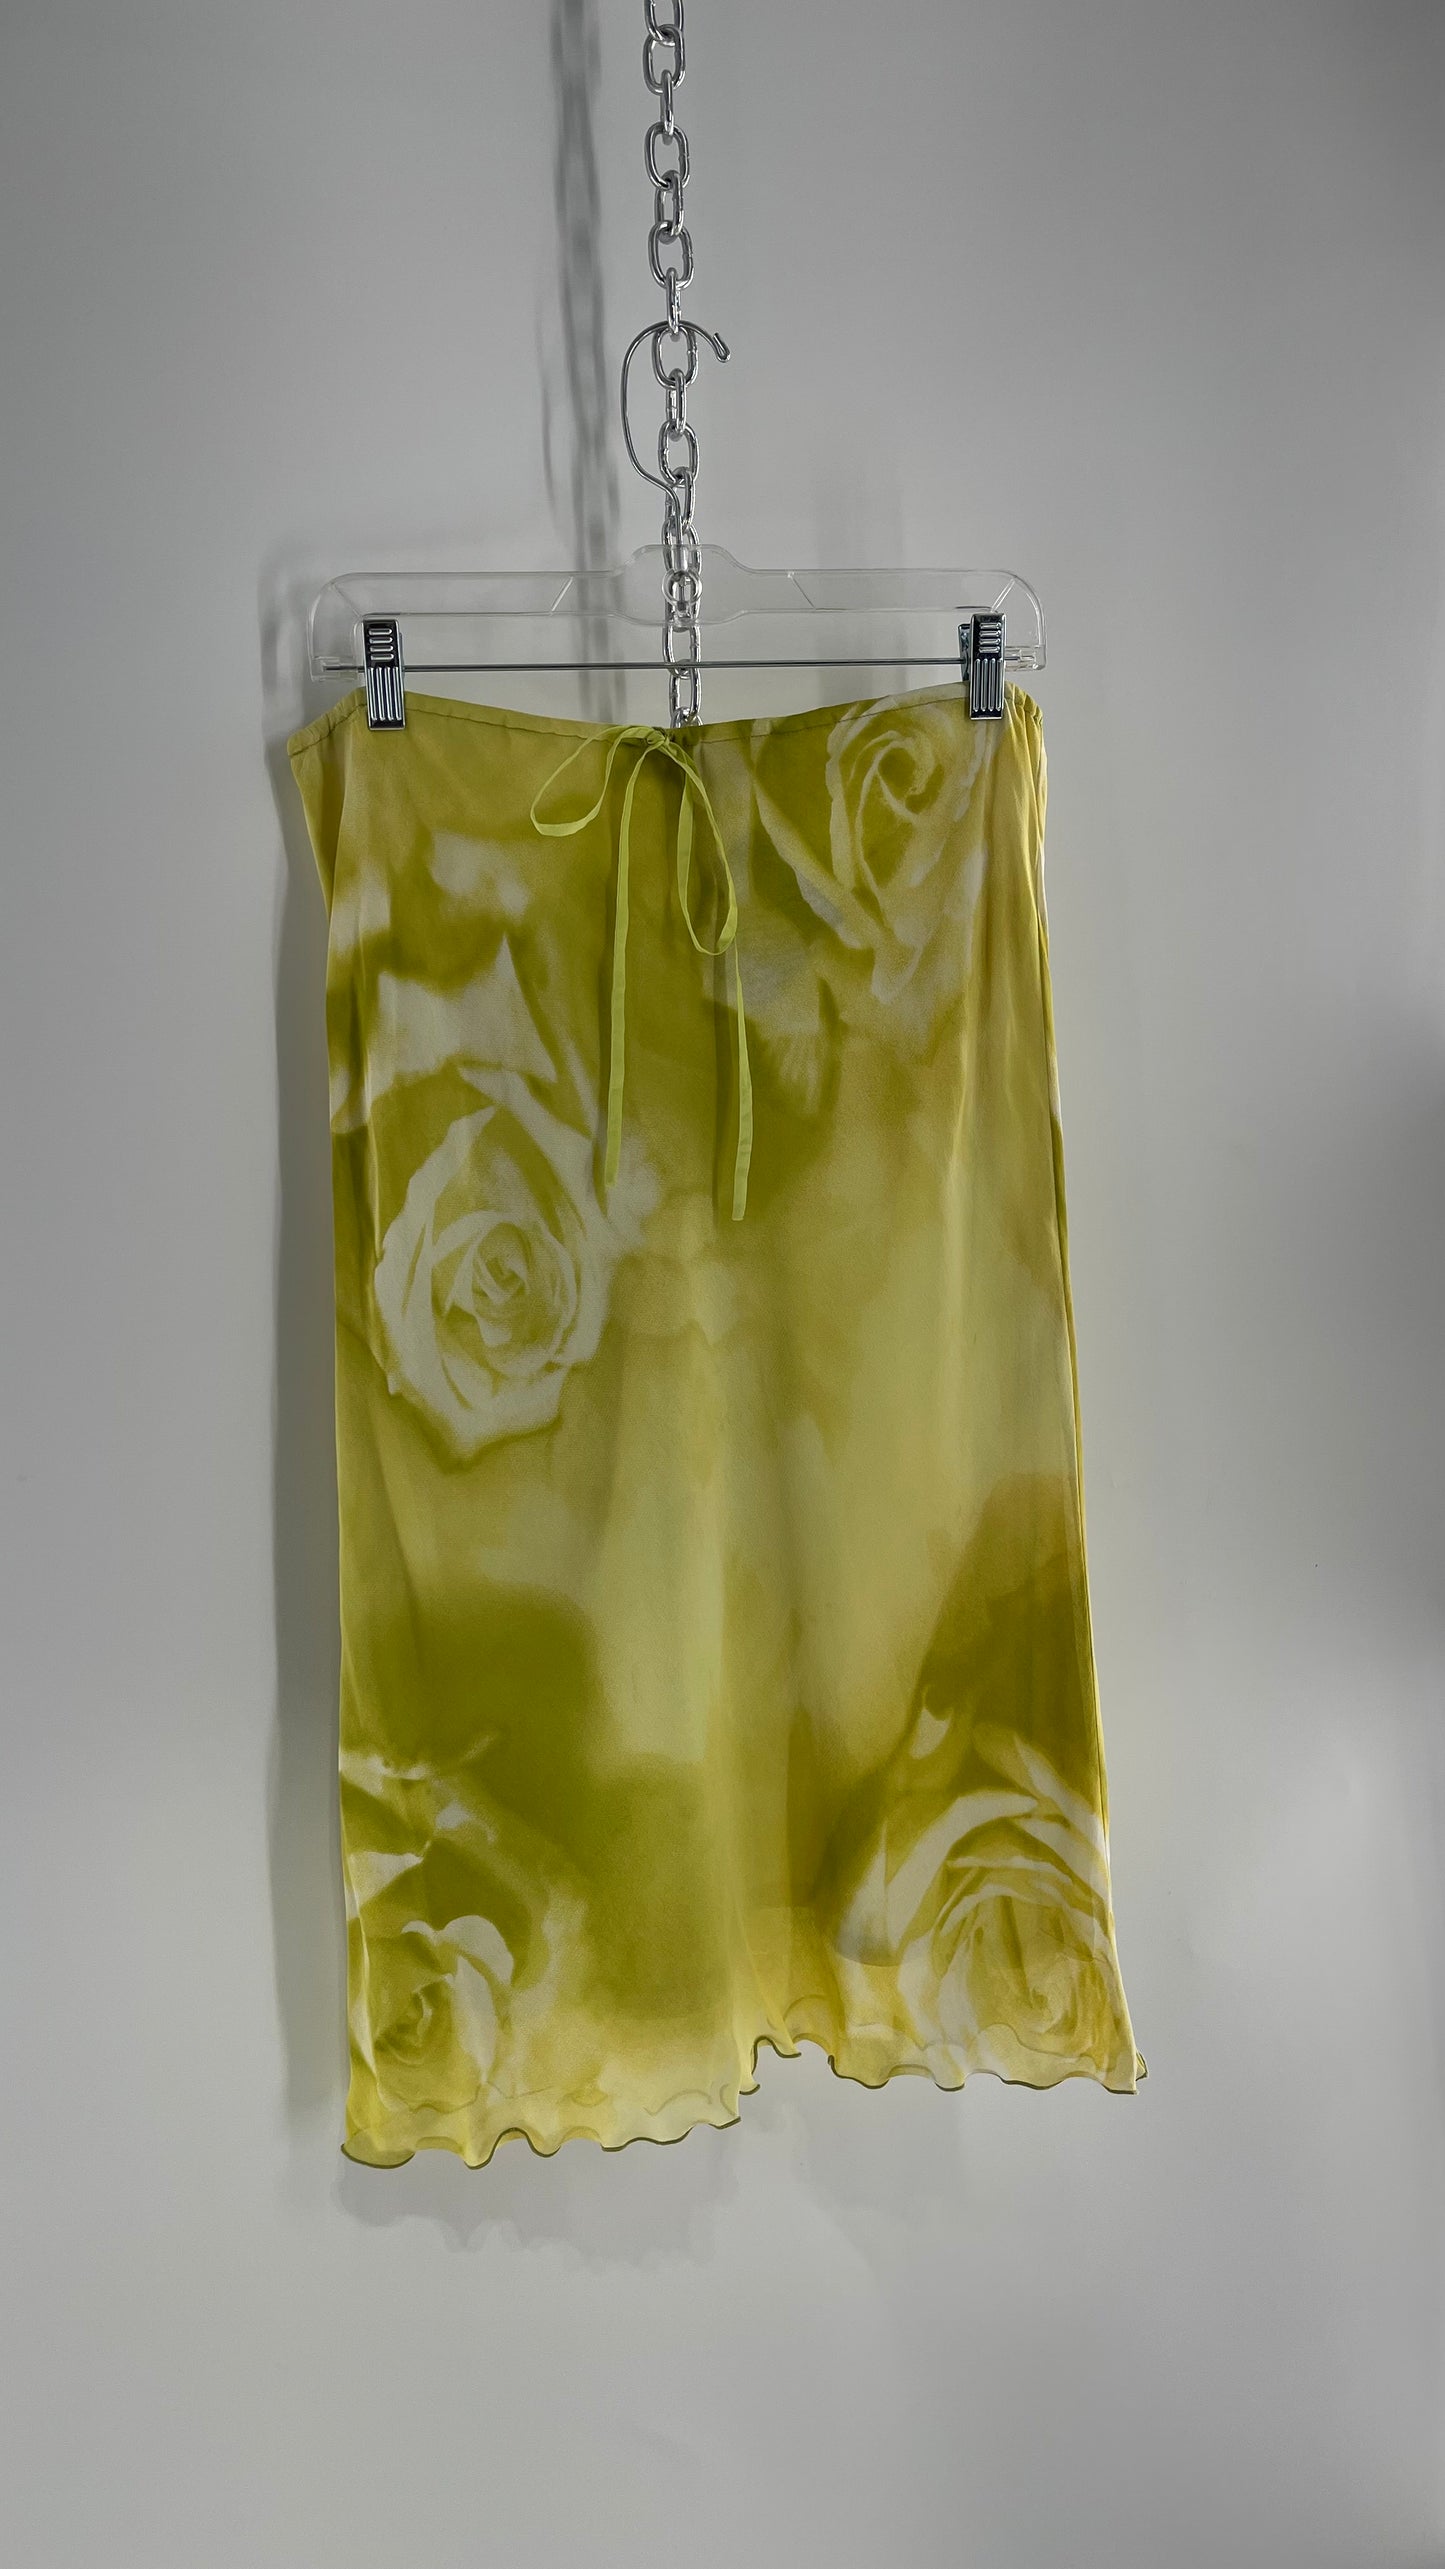 MOISELLE Neon Green Skirt with Blurred Roses, Low Waist, and Satin Ribbon  (38)